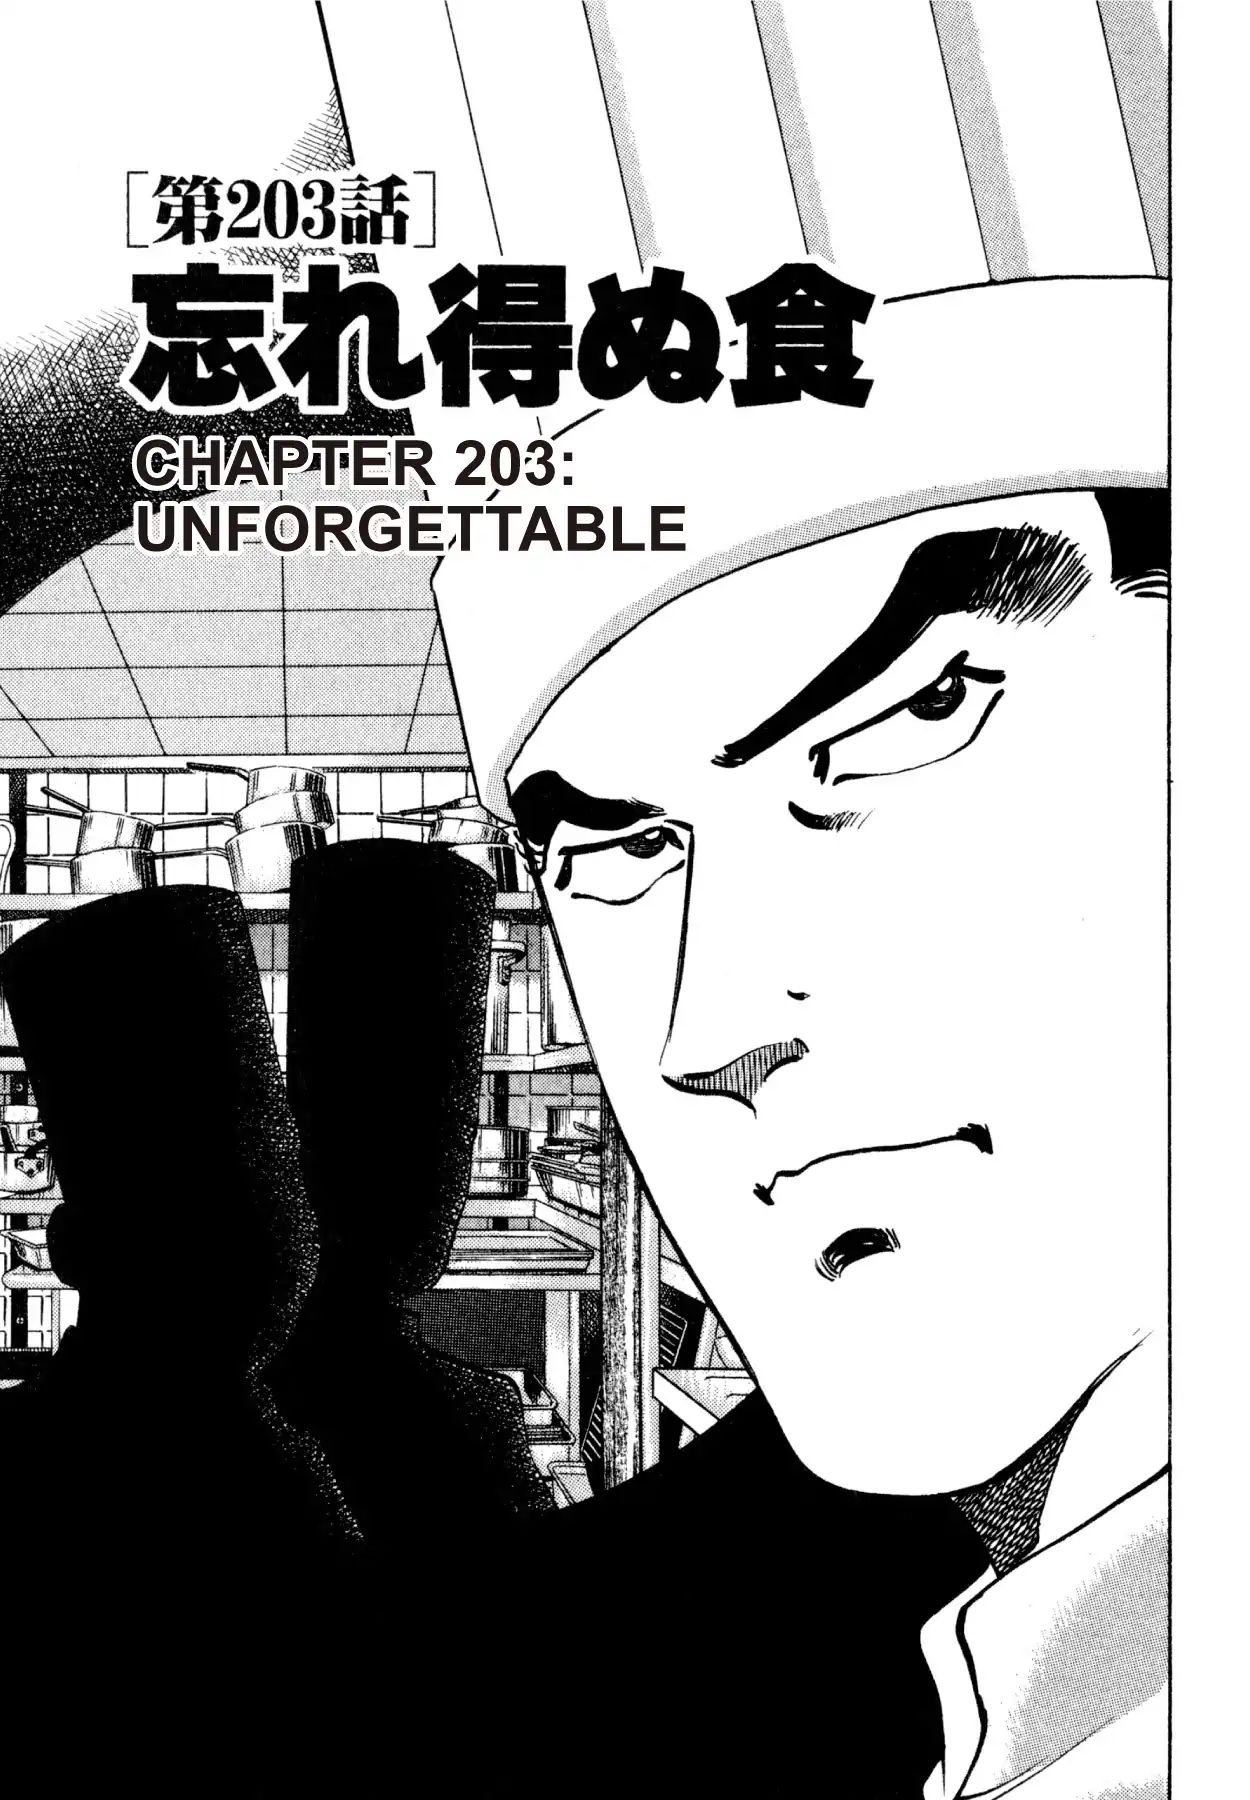 Shoku King VOL.22 CHAPTER 203: UNFORGETTABLE